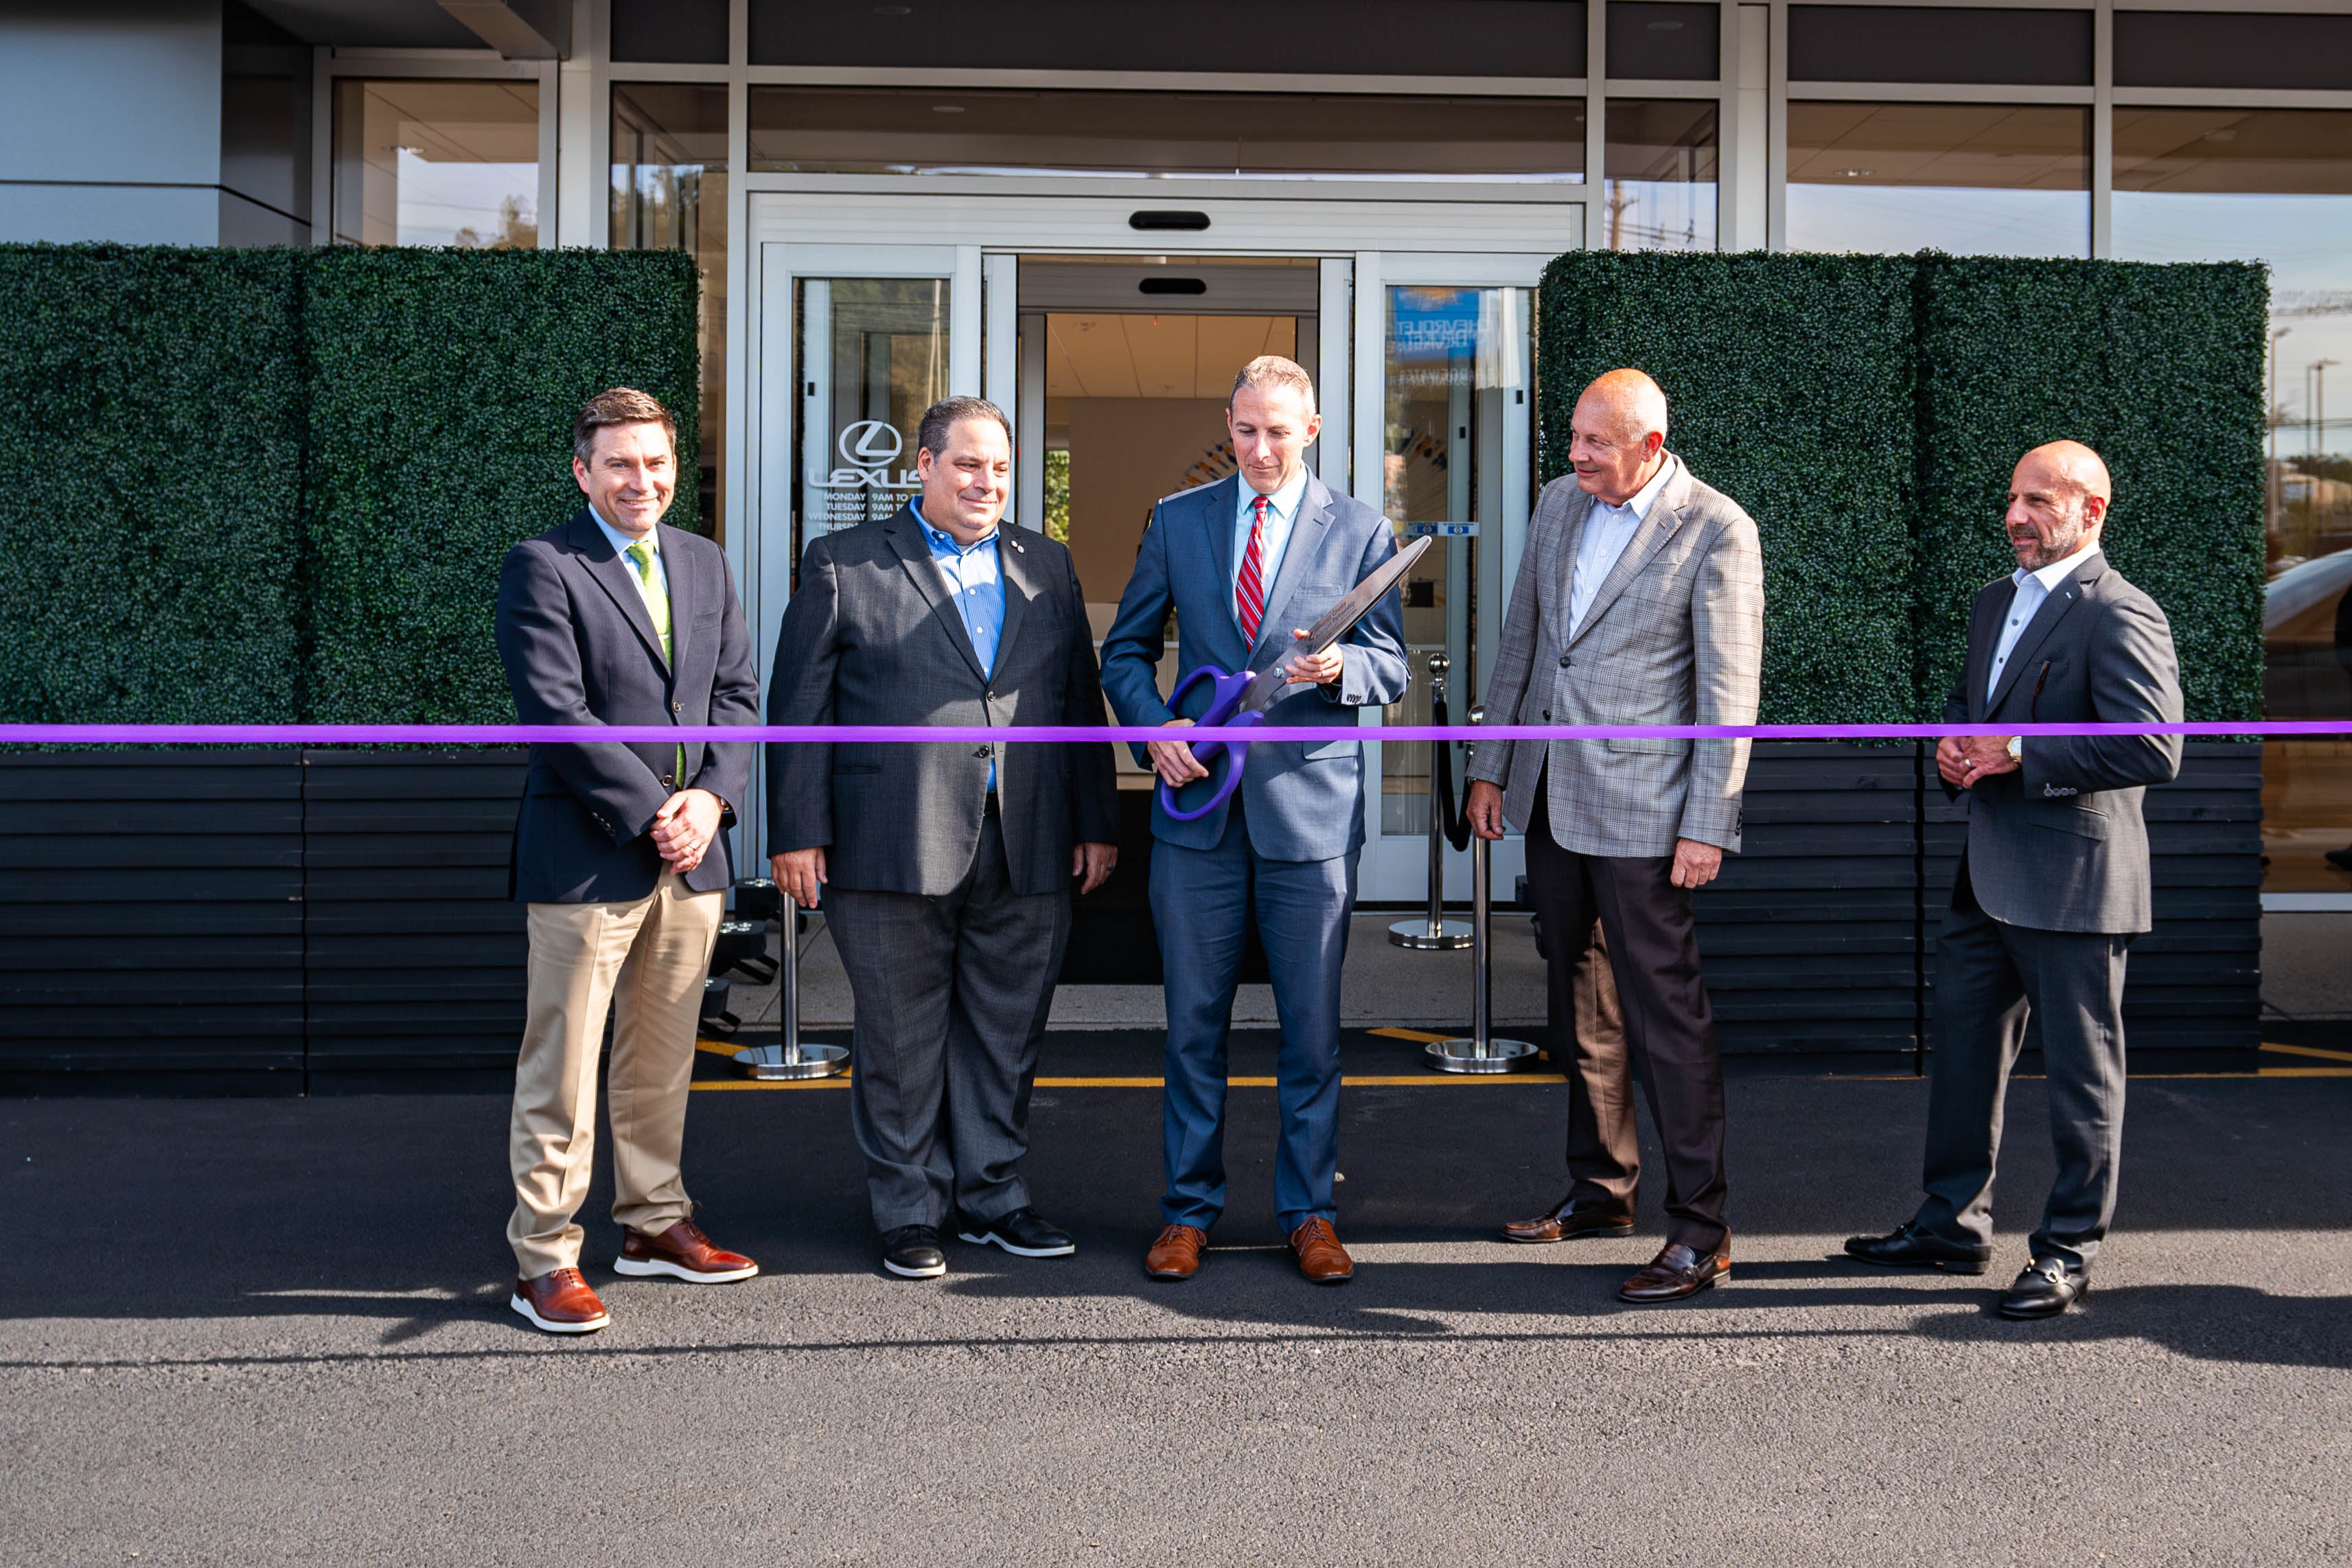 President of Kollective Bill Berardino at Lexus of Bridgewater cutting ribbon at the grand reopening of the dealership's showroom with a Lexus RZ test drive event.